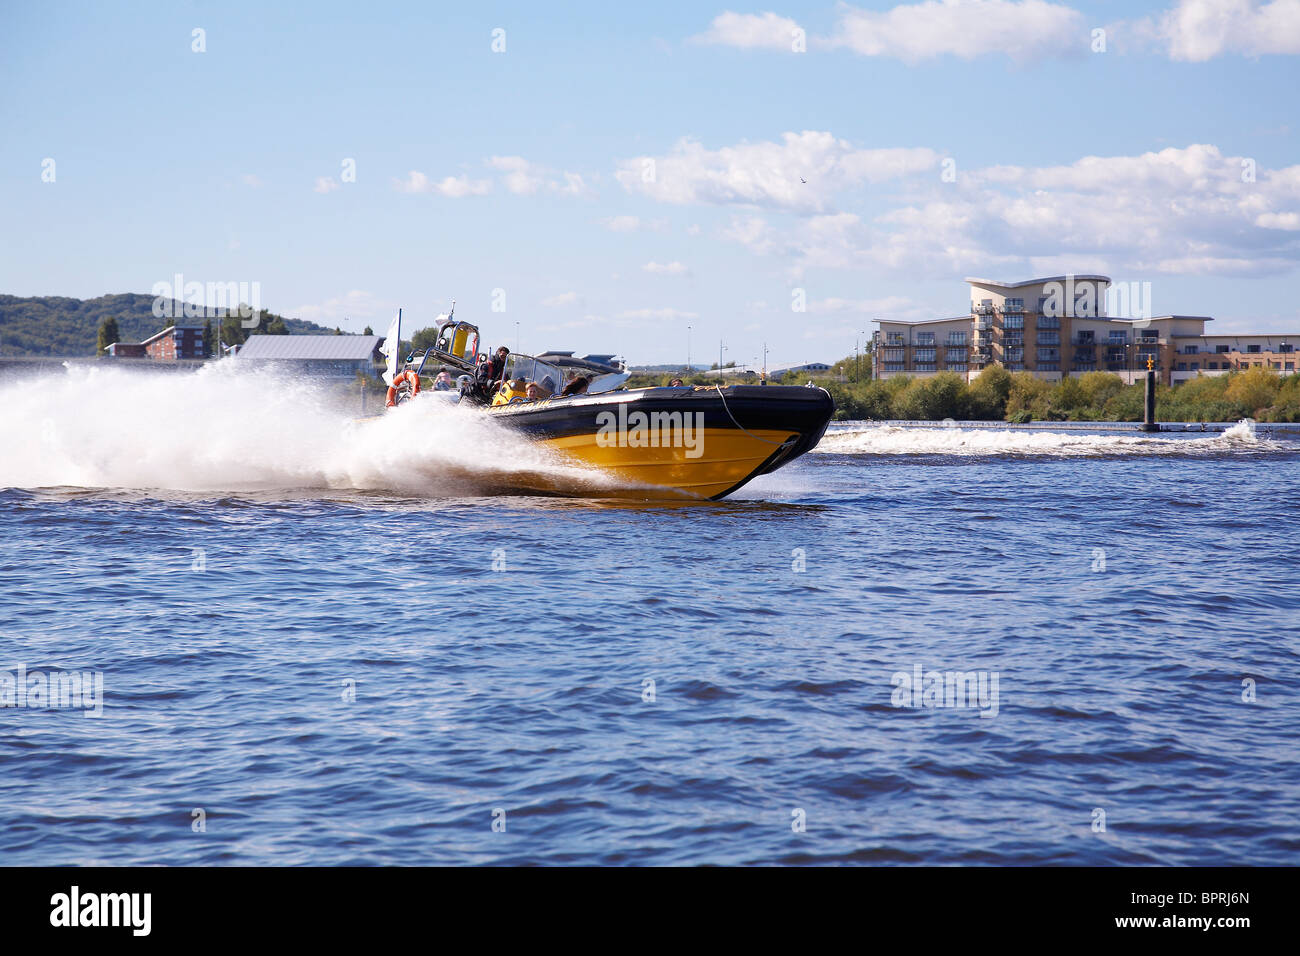 People being taken on a fun excursion in a Rib around Cardiff bay. Stock Photo